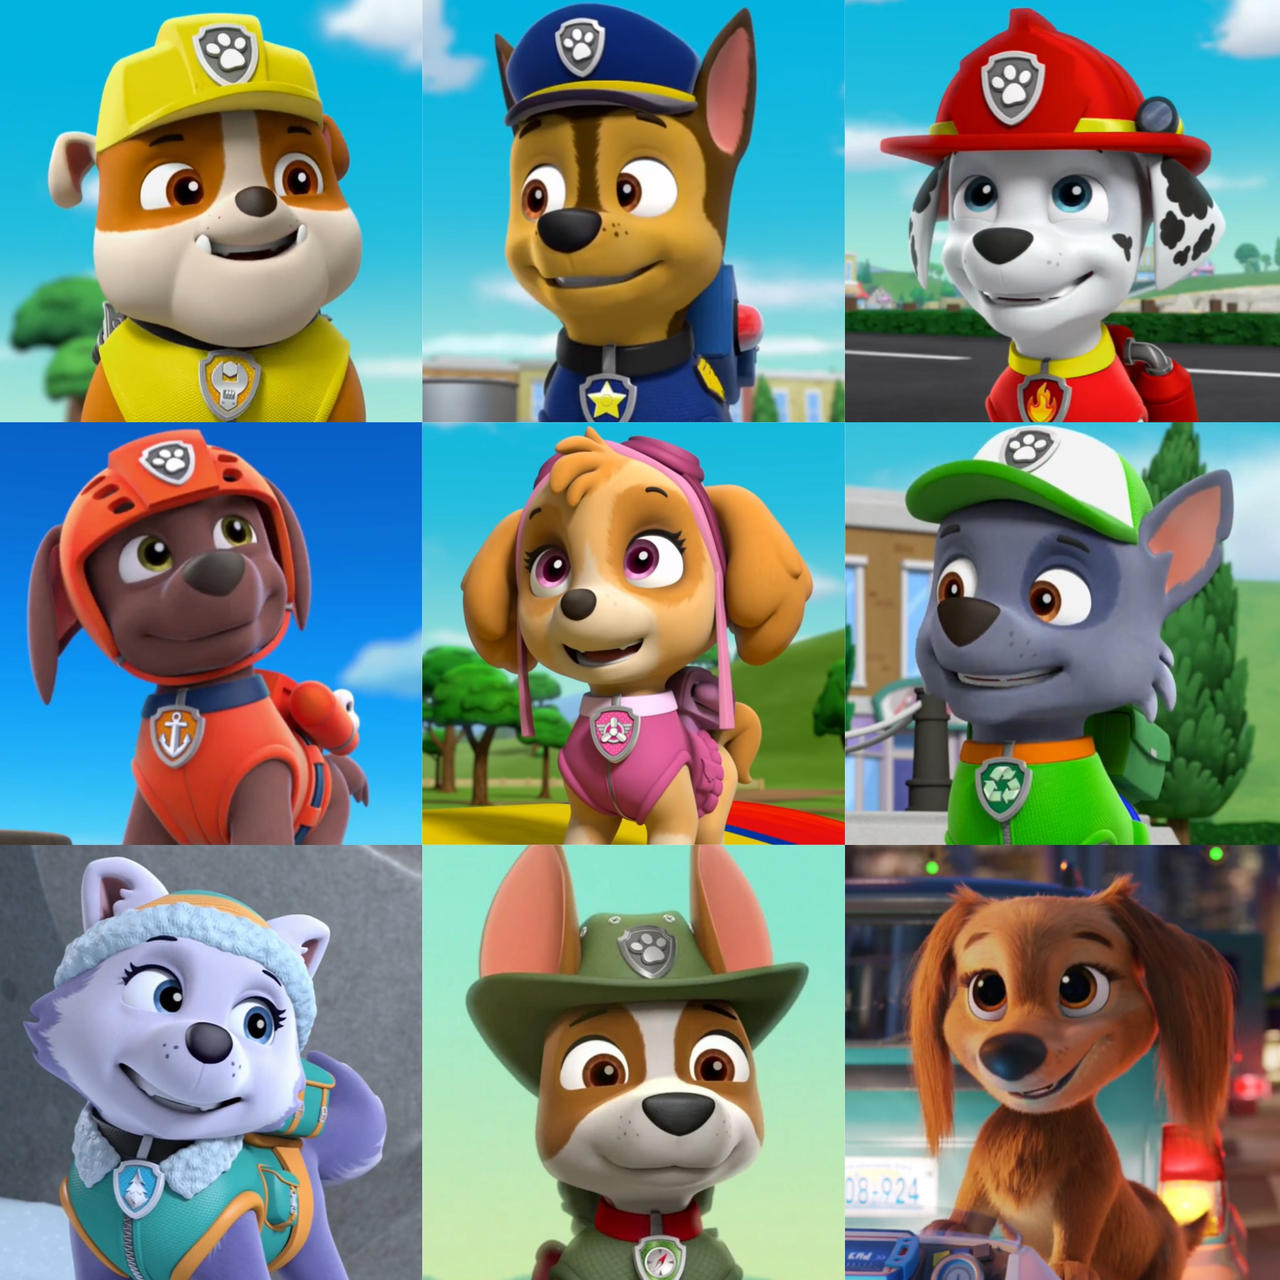 Paw Patrol Pups (with Everest Tracker and Liberty) by Lahmom2000